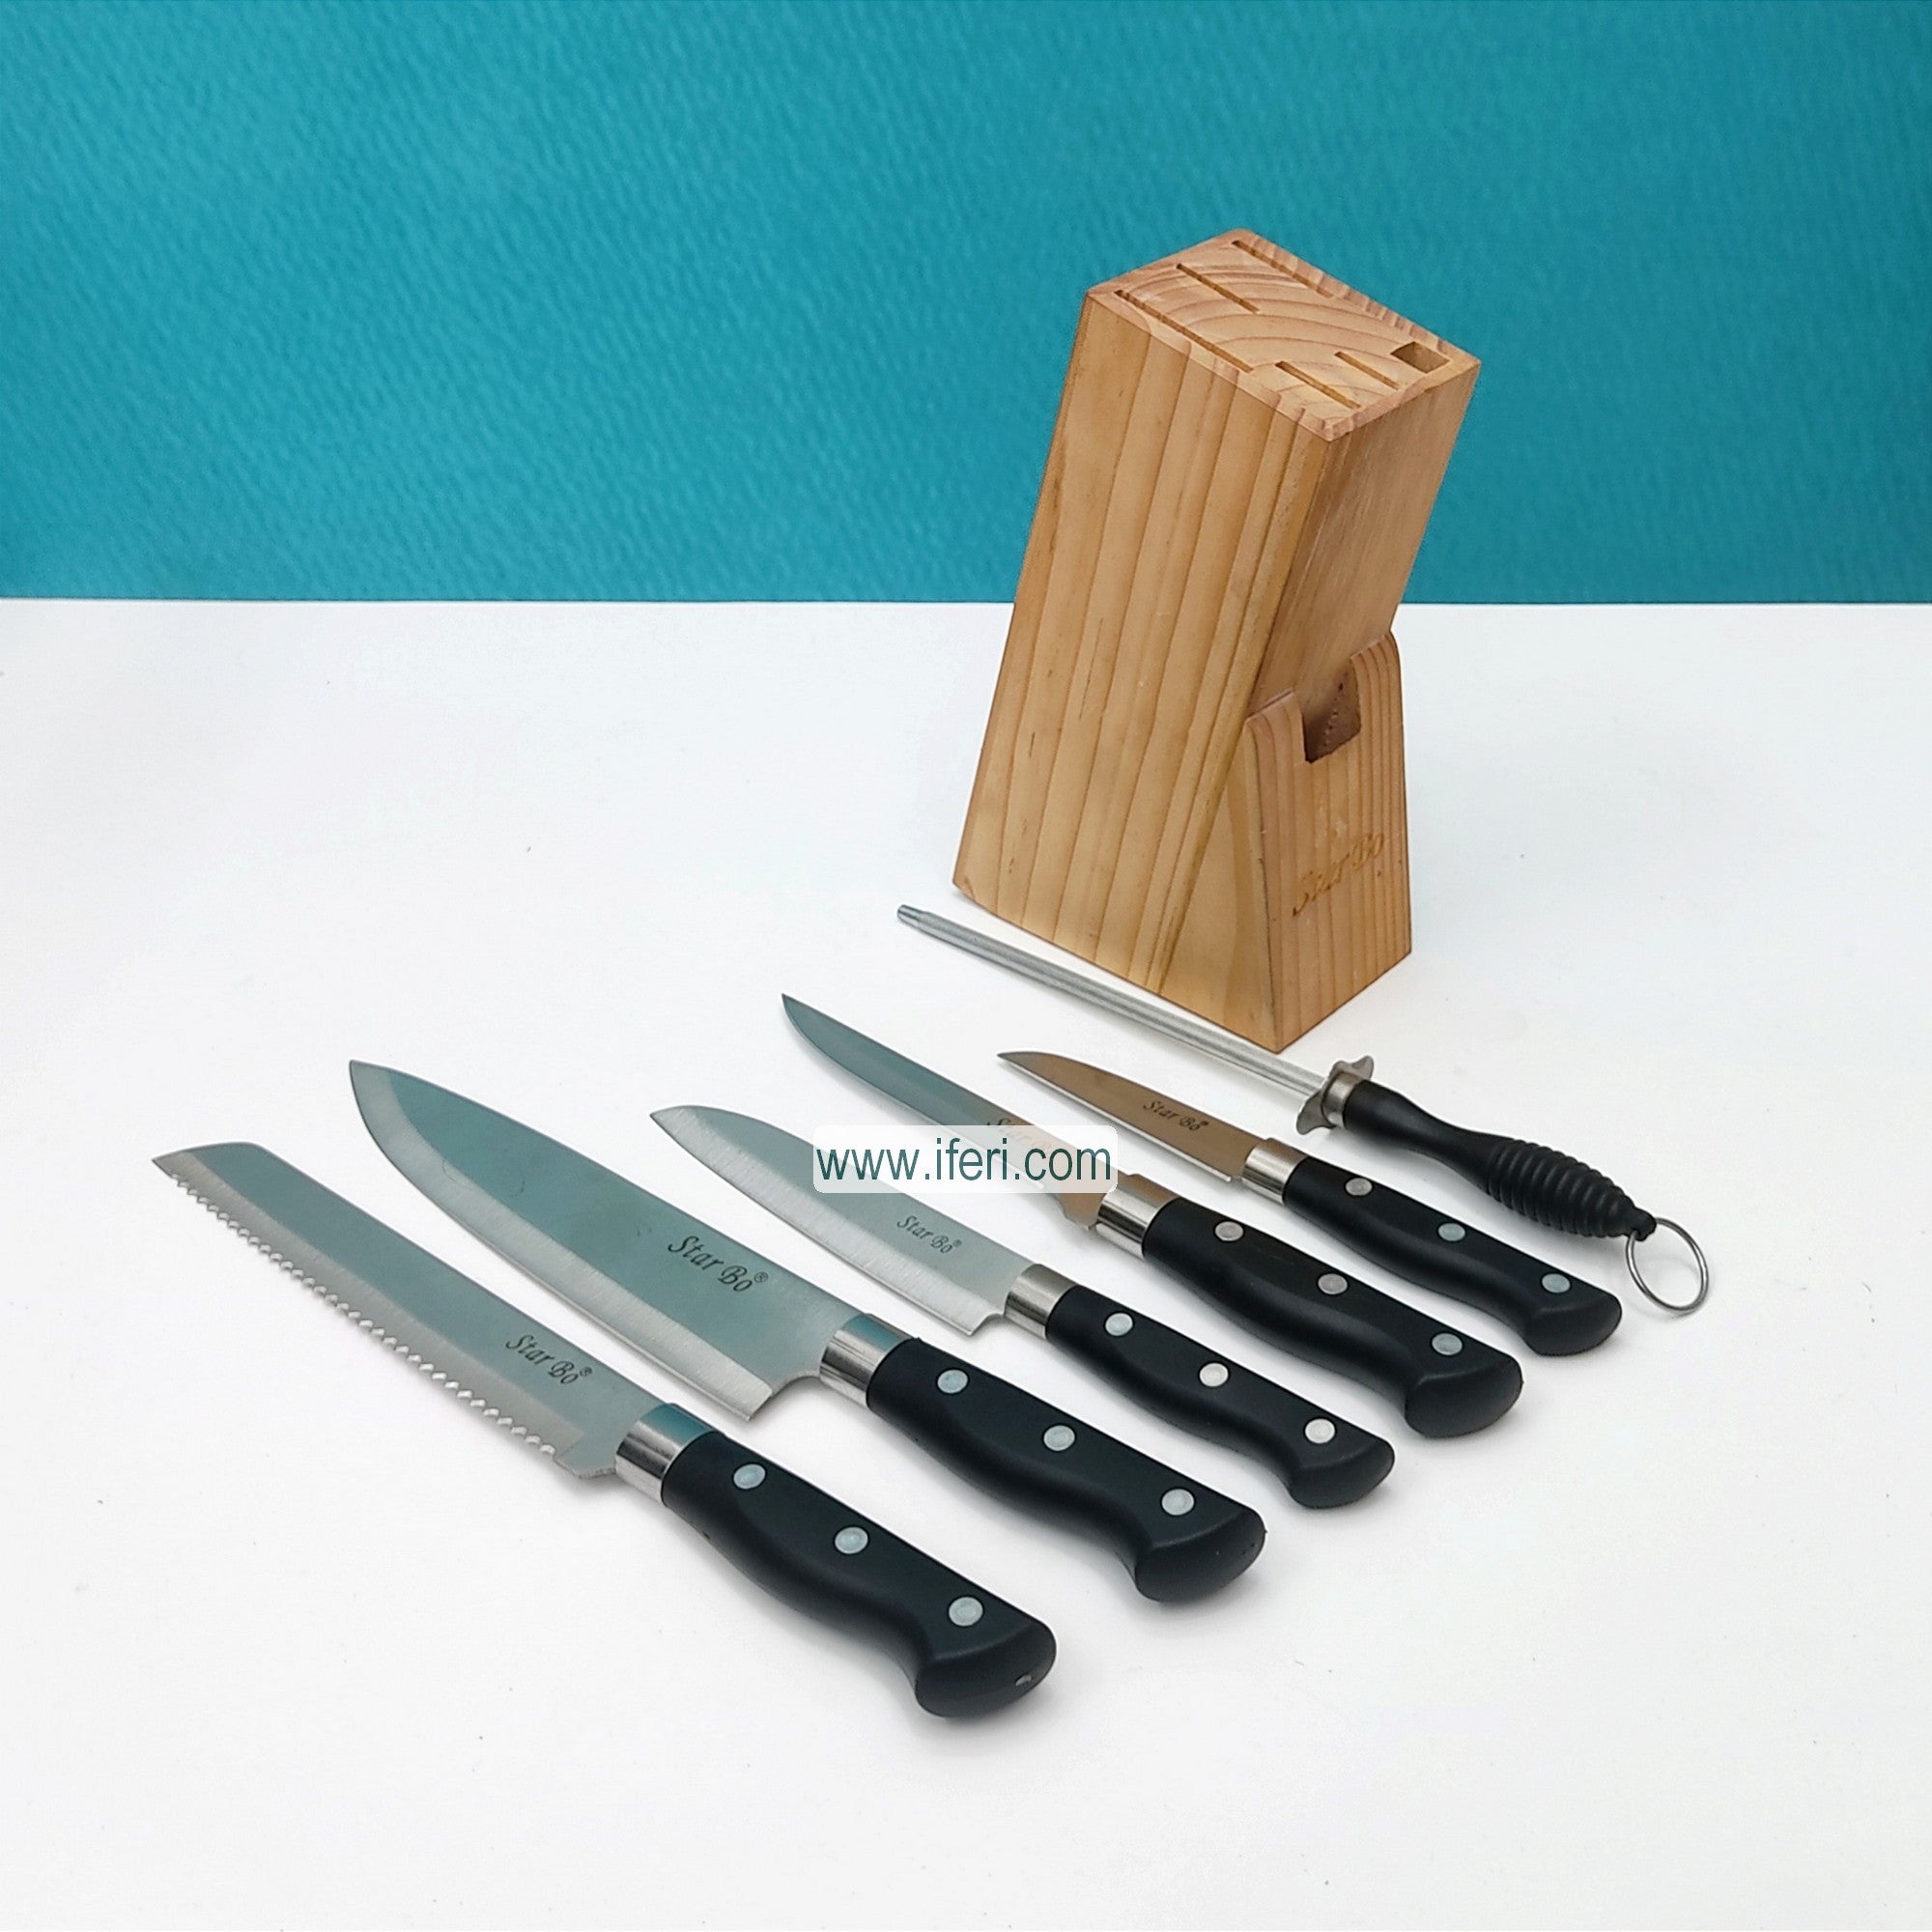 7 Pcs Knife Set with Wooden Holder SY65891